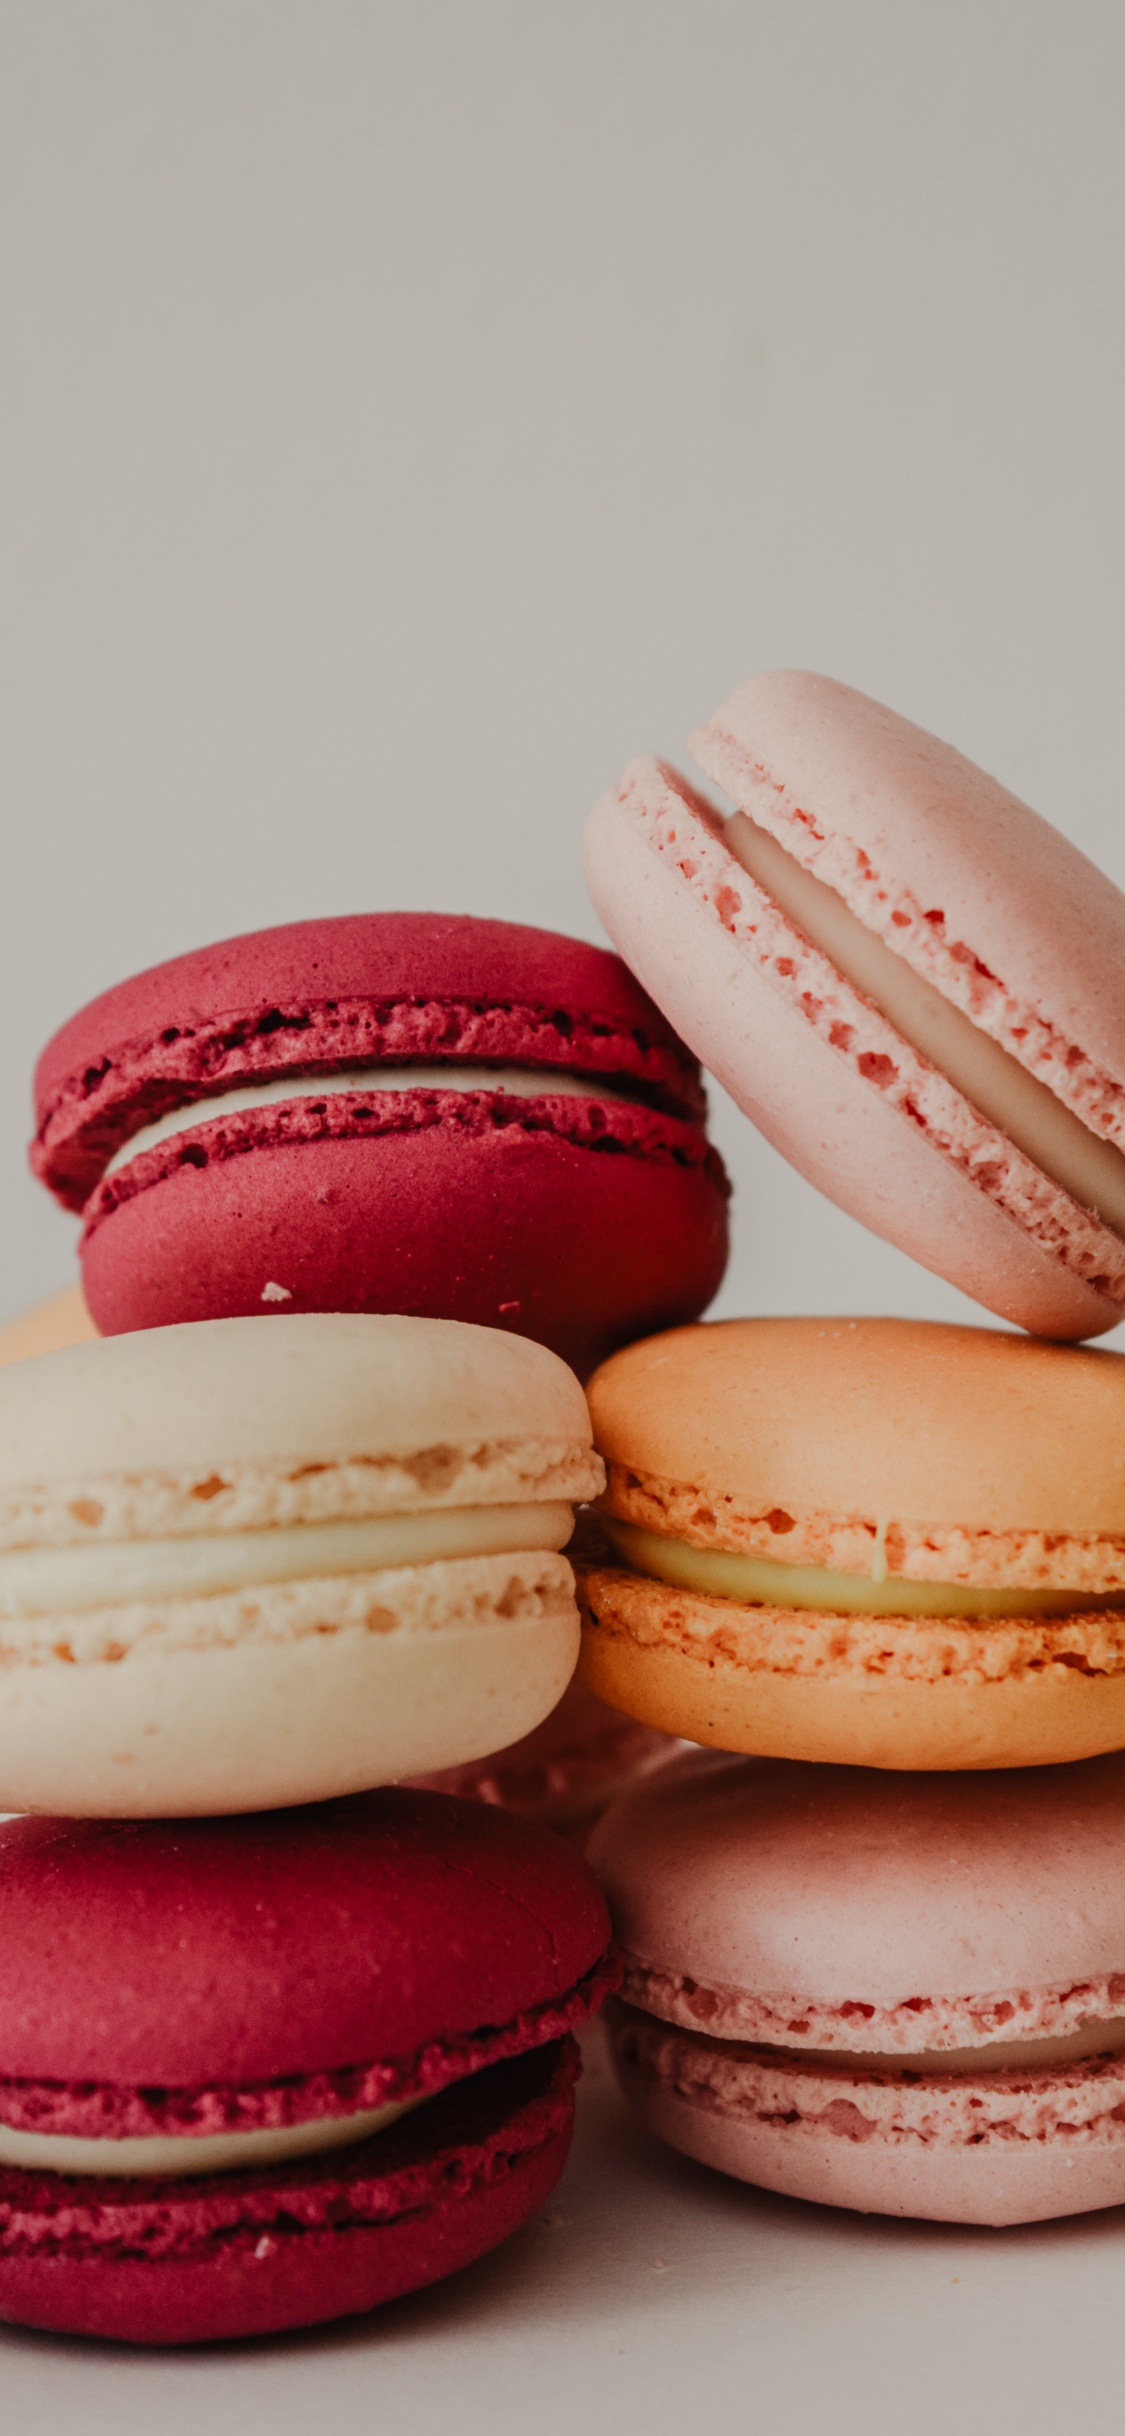 3 Macarons Roses et Blancs. Wallpaper in 1125x2436 Resolution